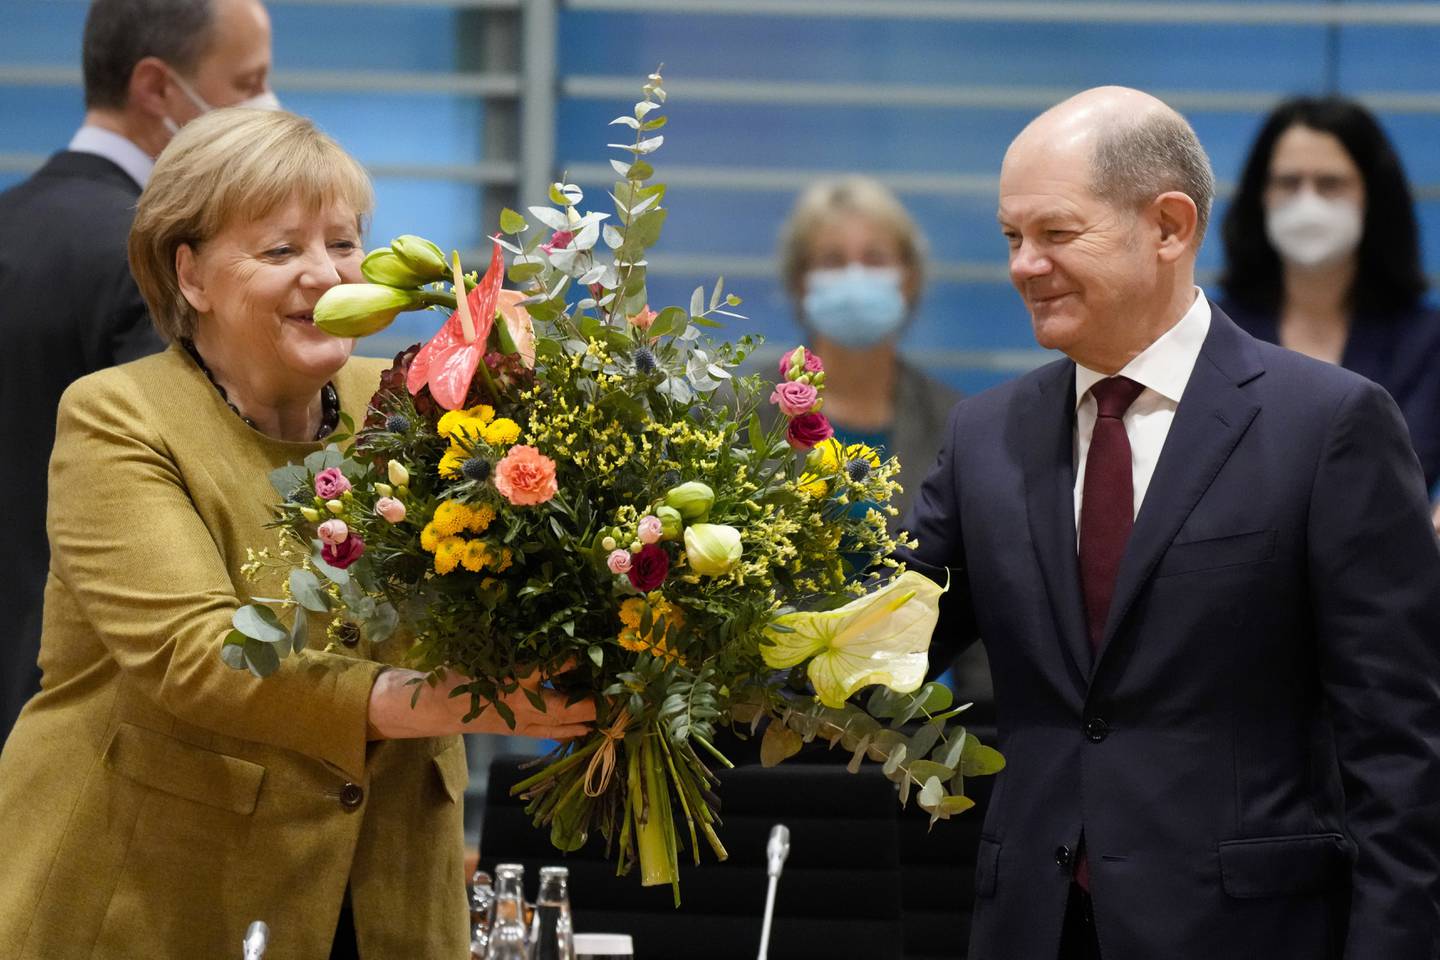 Olaf Scholz succeeds Angela Merkel in the chancellery, becoming the fourth leader of a reunified Germany. AP 